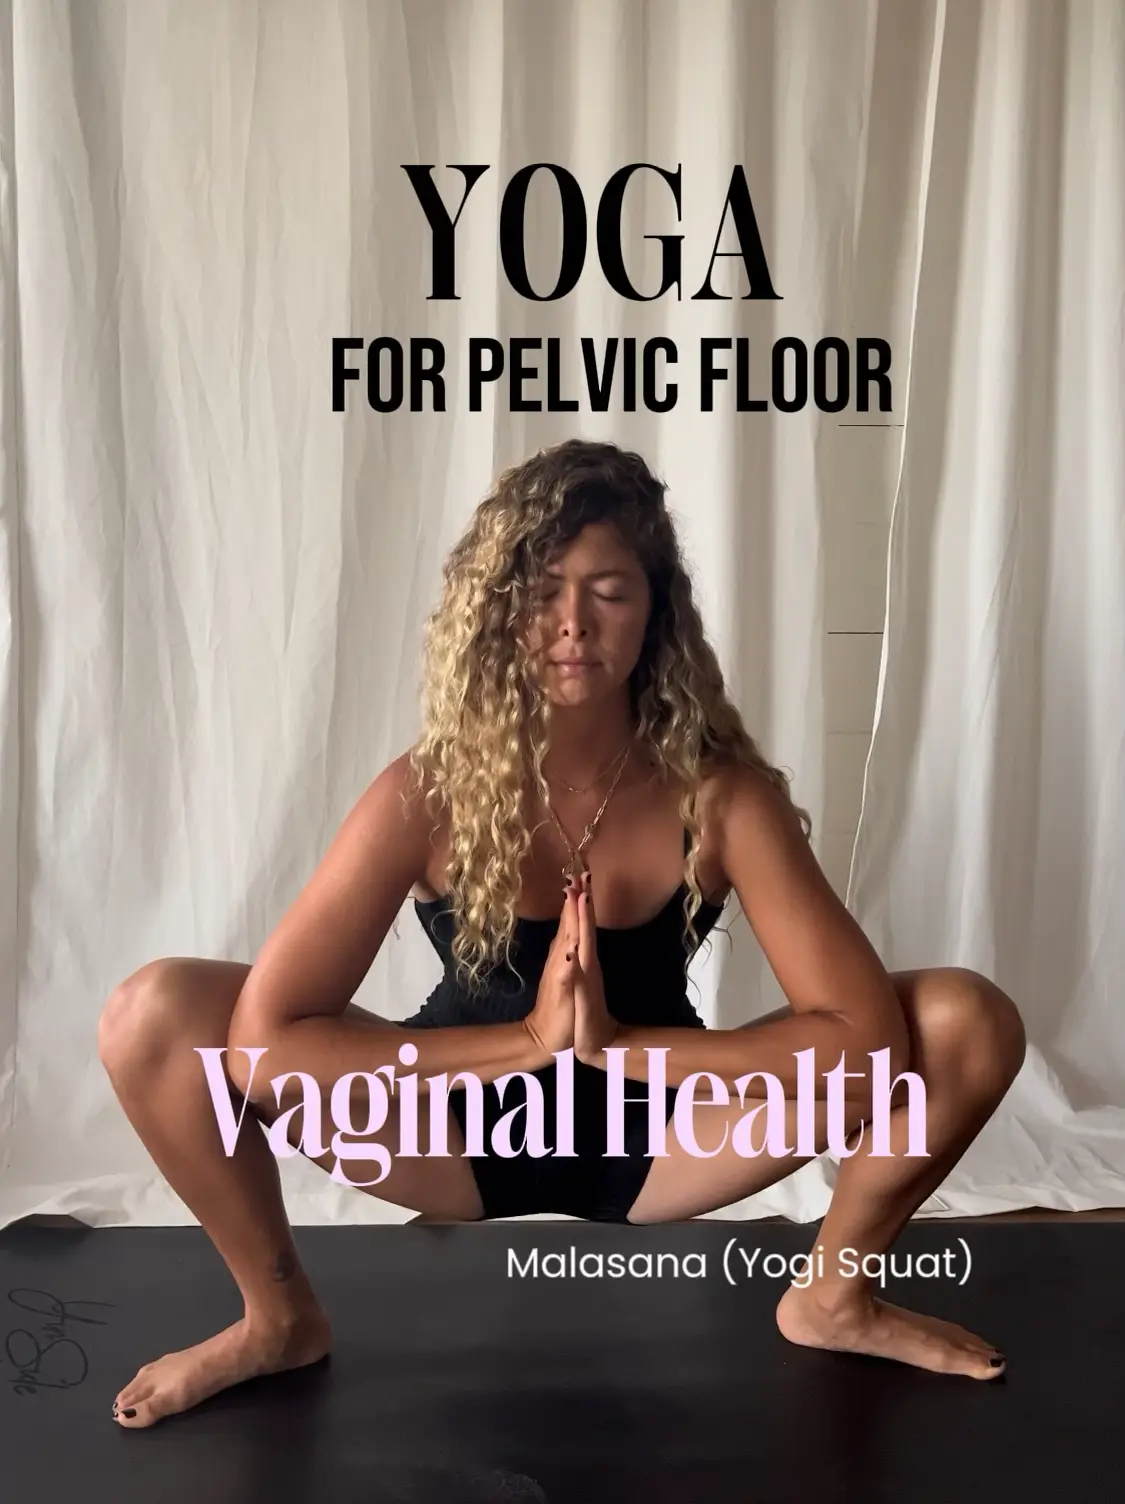 Hip and Pelvic Floor Release Stretches With Yoga Blocks (20